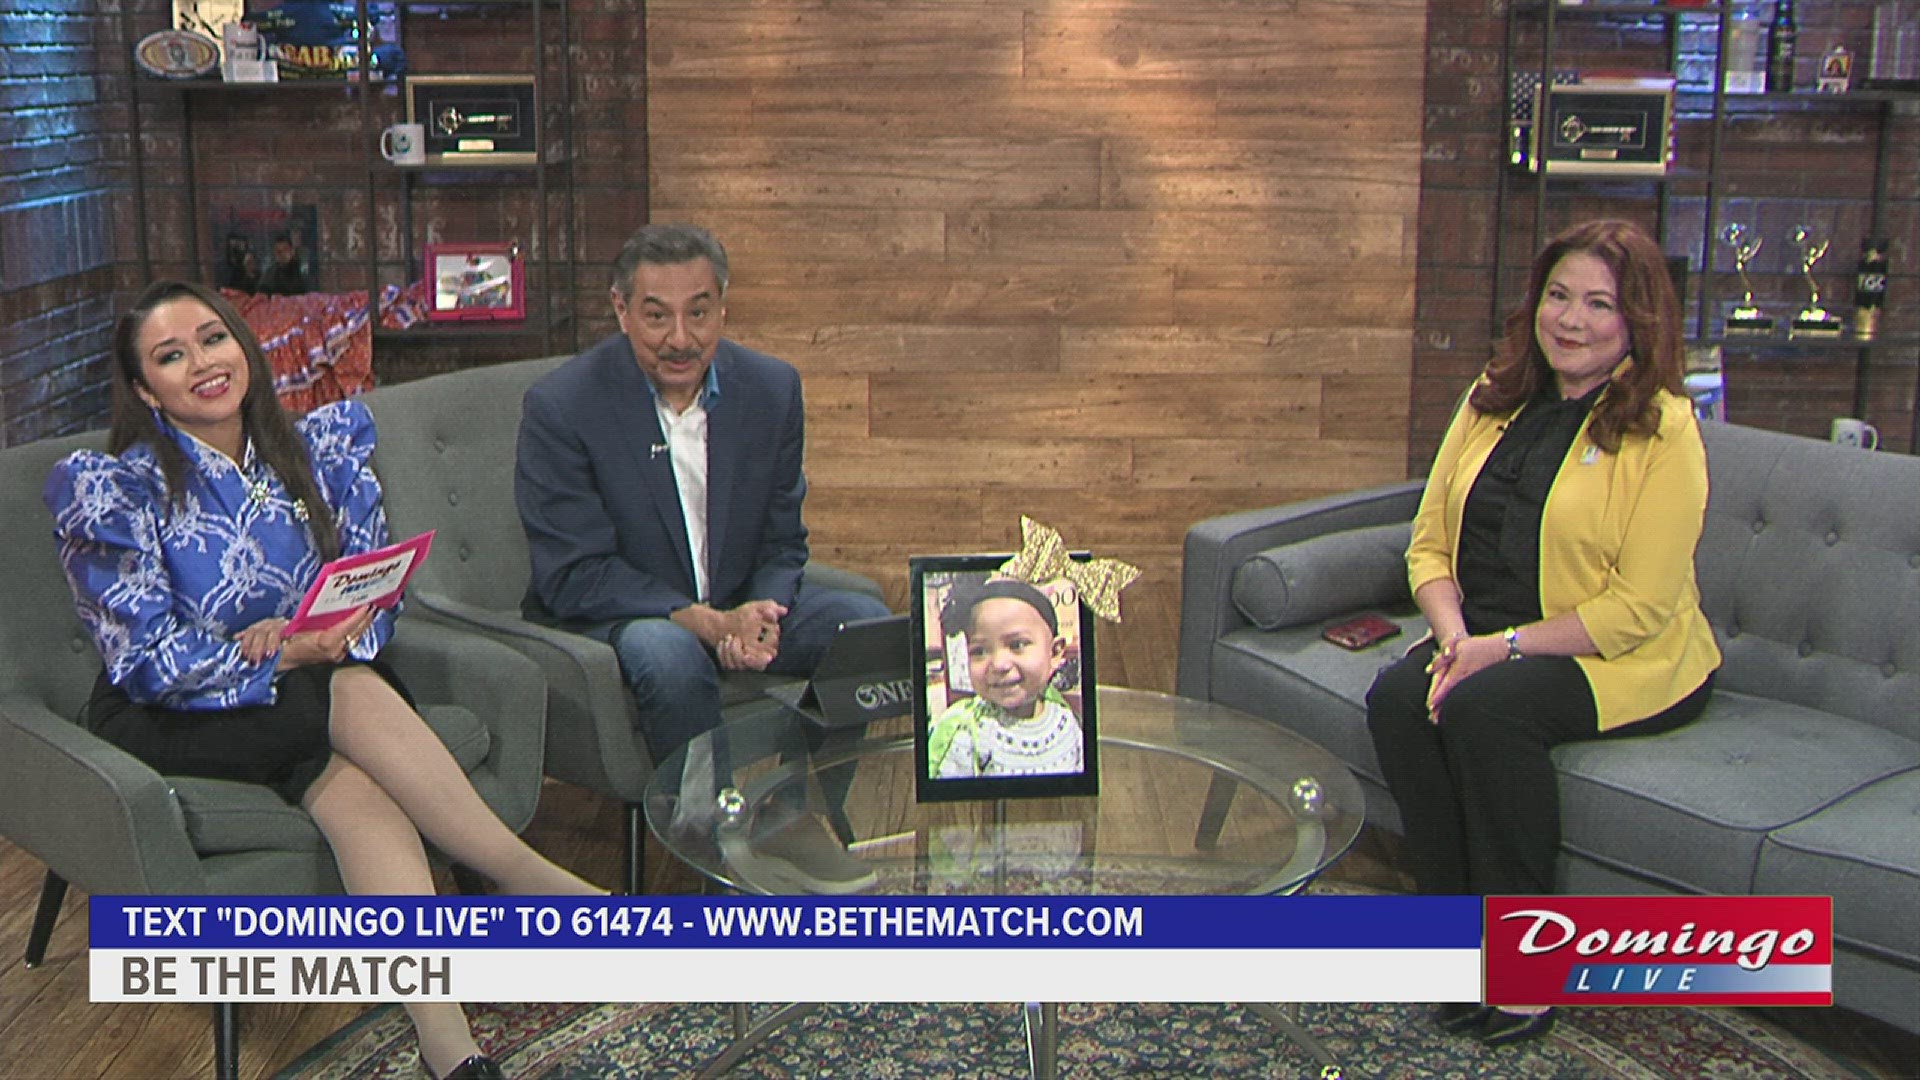 Be the Match's Leticia Mondragon joined us on Domingo Live to explain how the community can help save lives by donating blood stem cells to blood cancer patients.